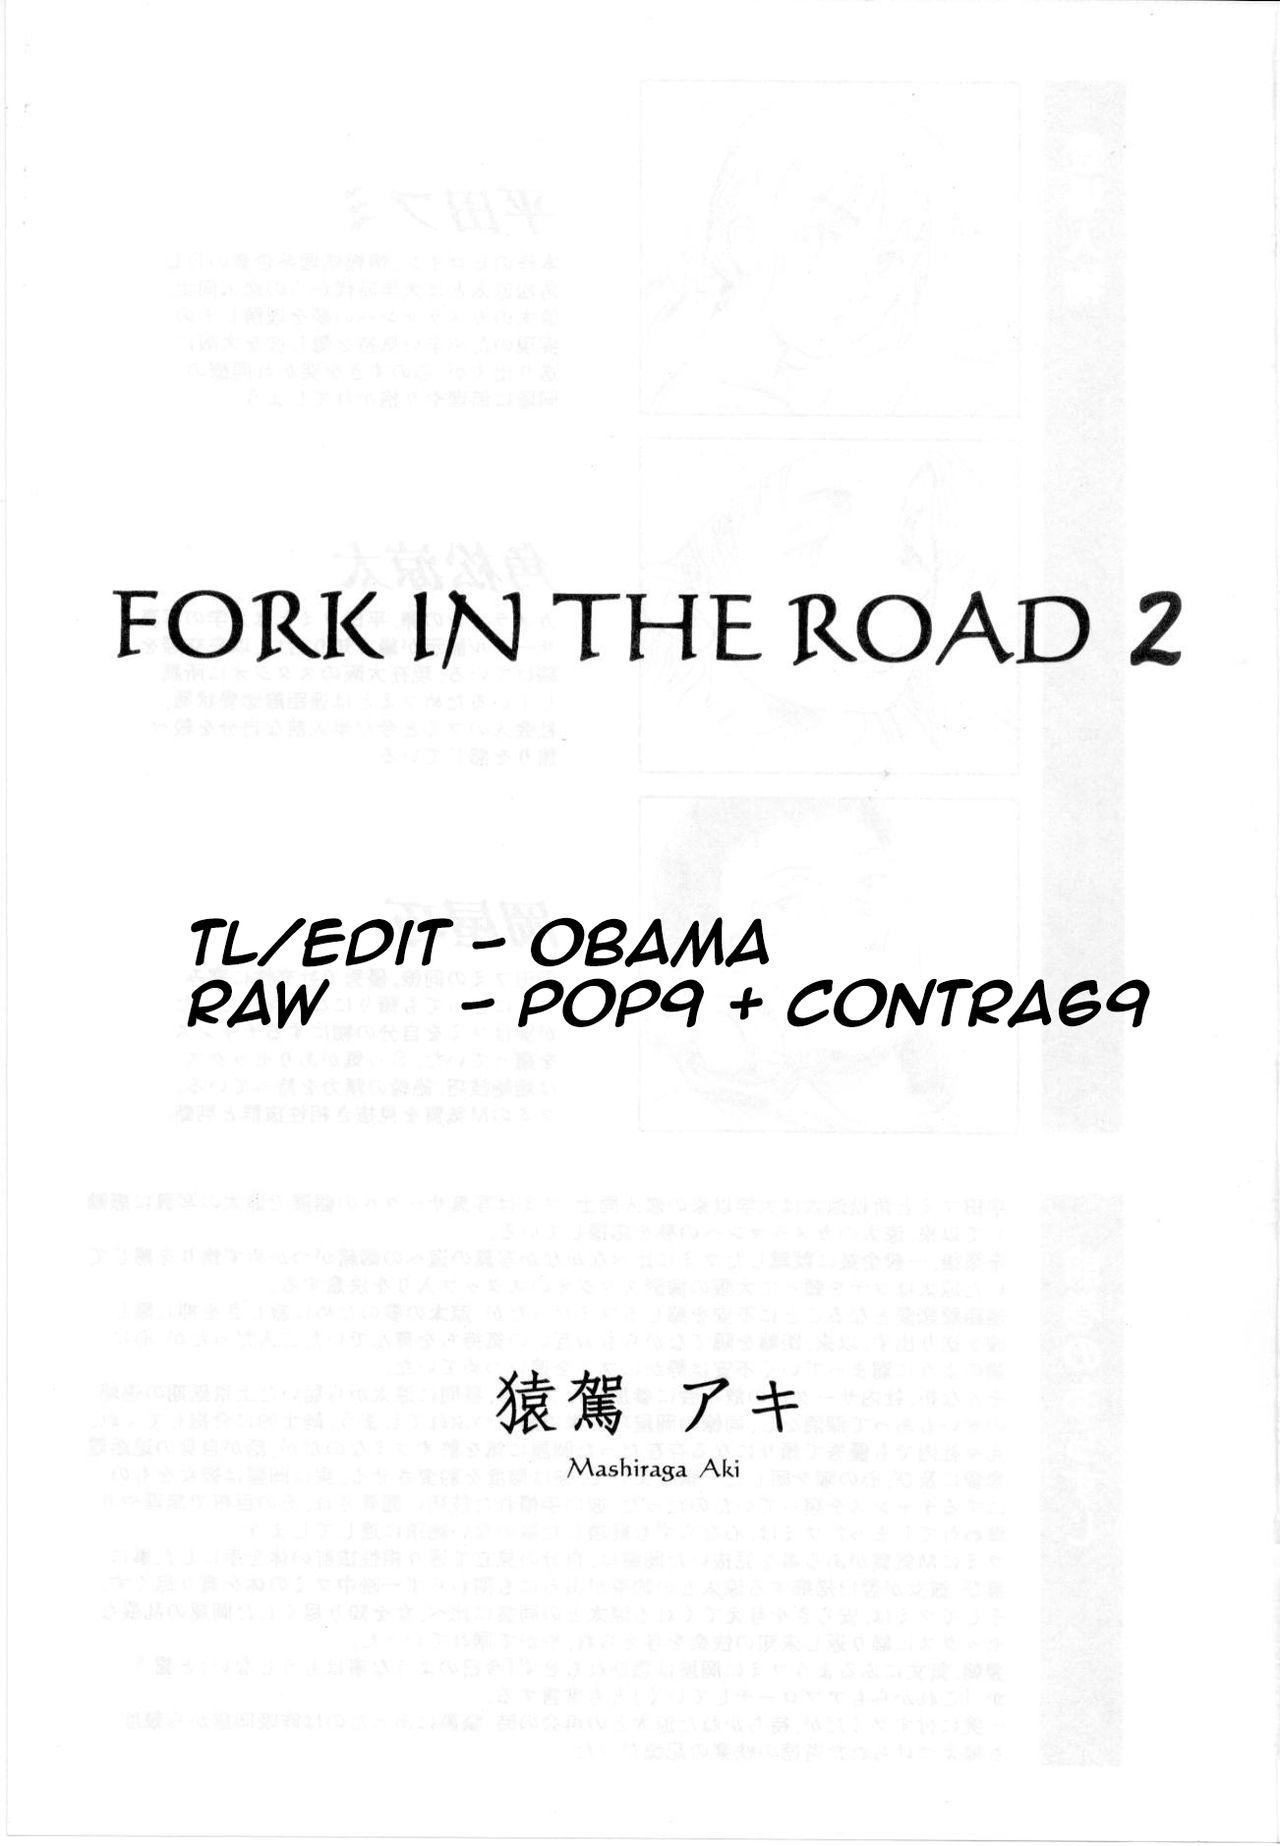 FORK IN THE ROAD 2 126